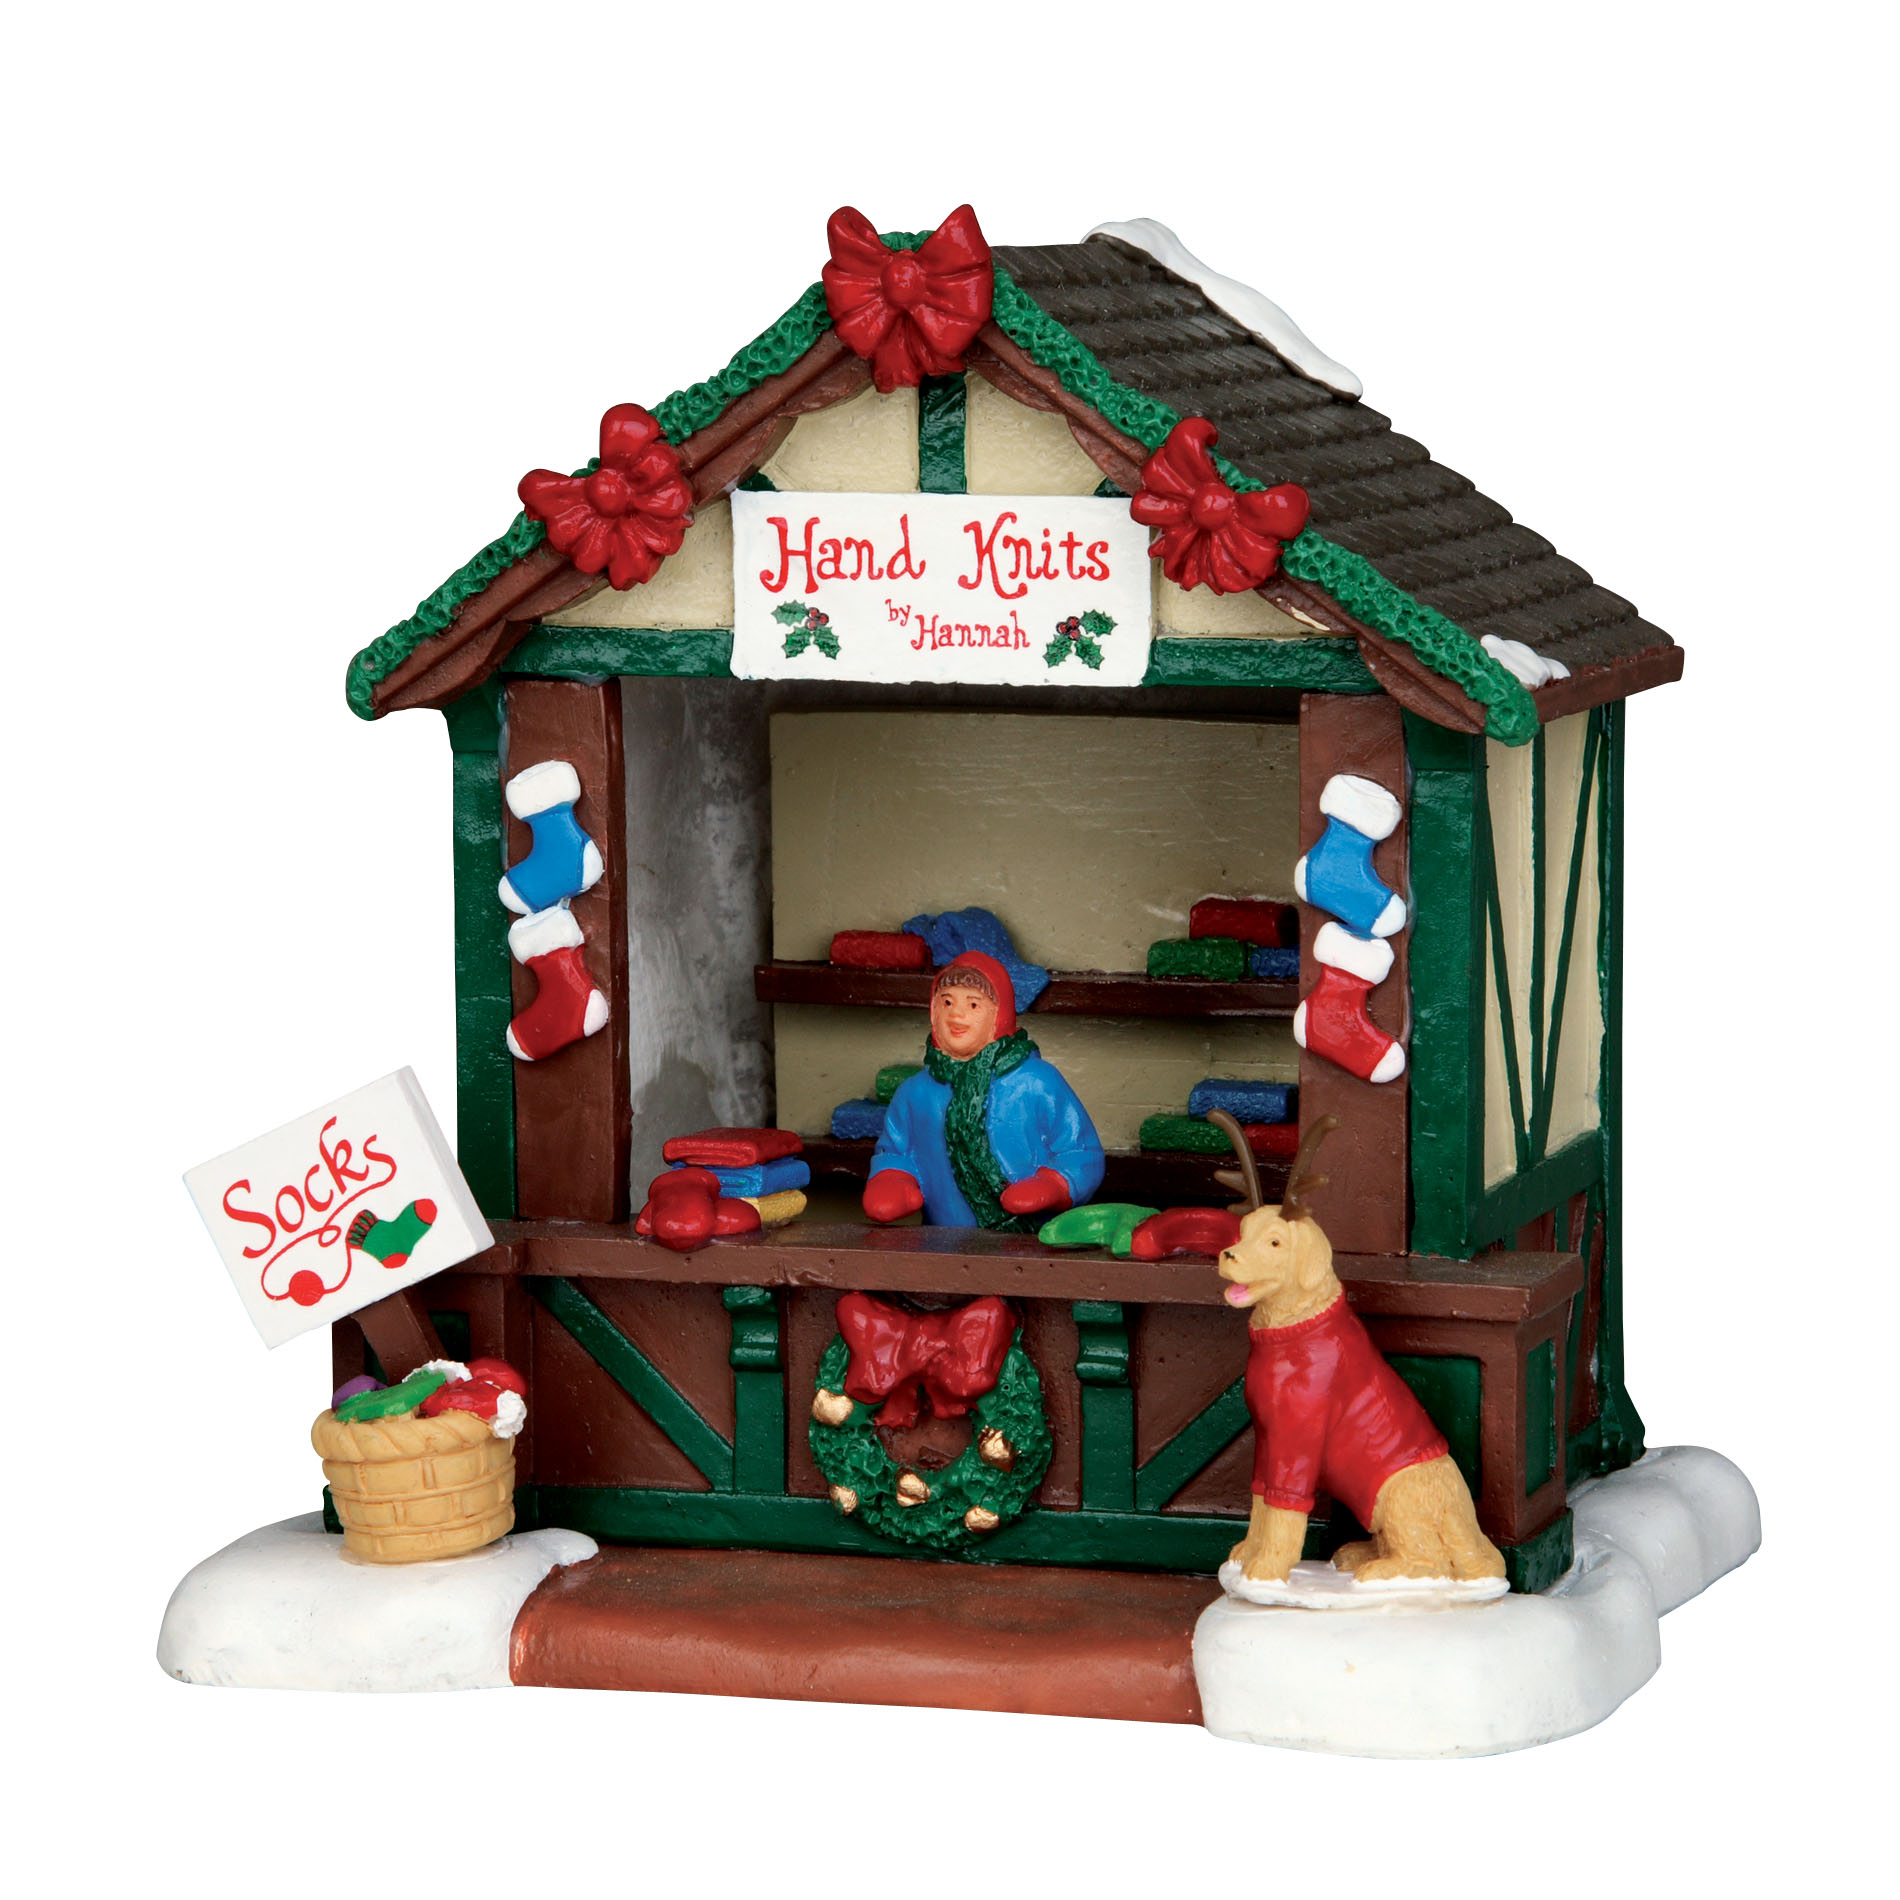 Lemax Village Collection Christmas Village Accessory, Hand Knit Goods Stand